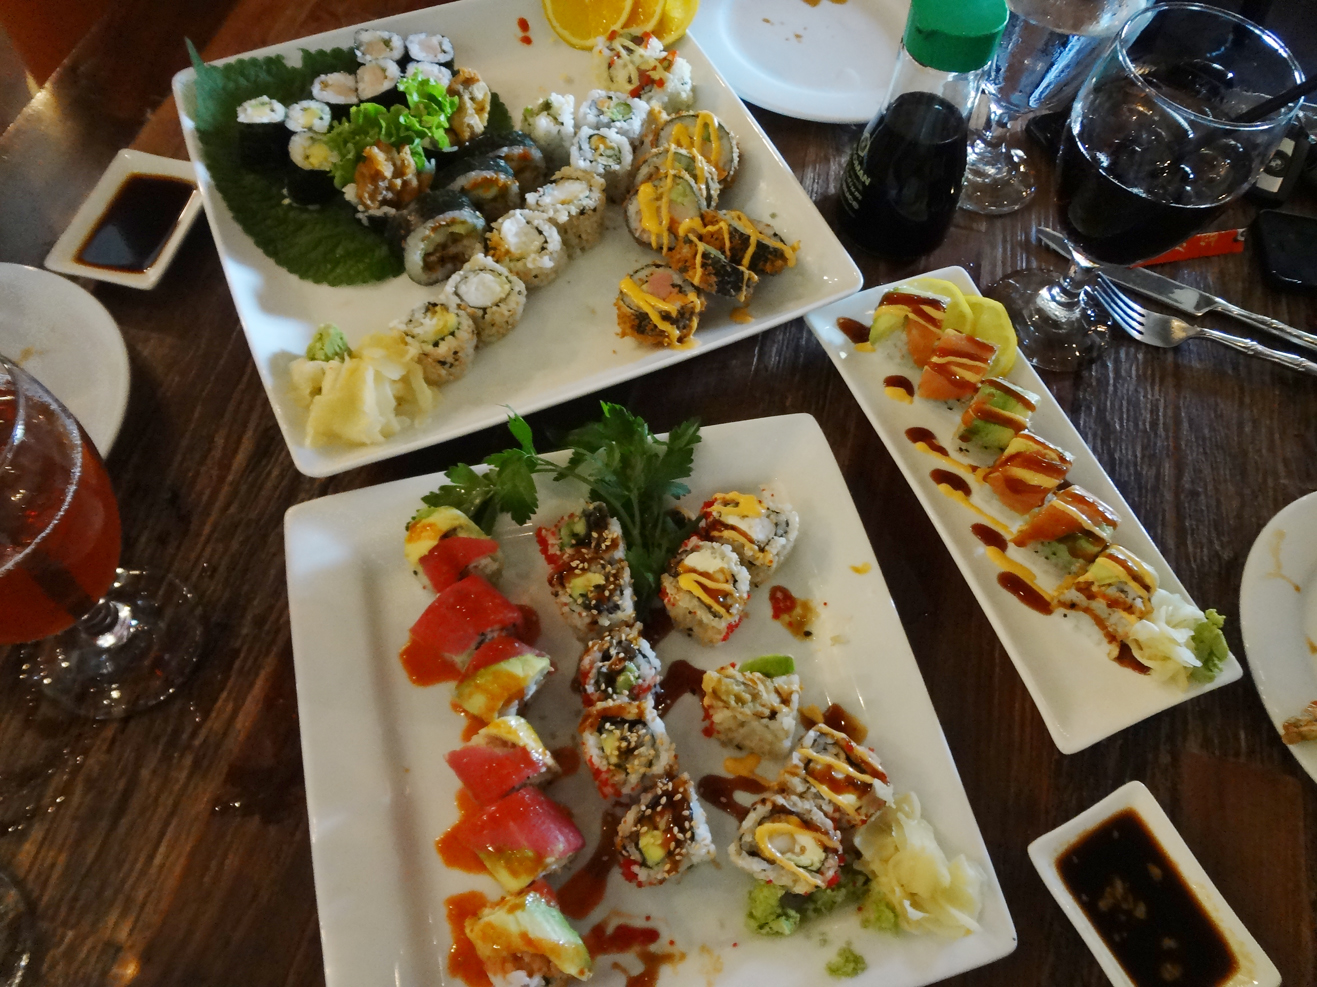 Our lunchtime spread at Bua Thai and Sushi